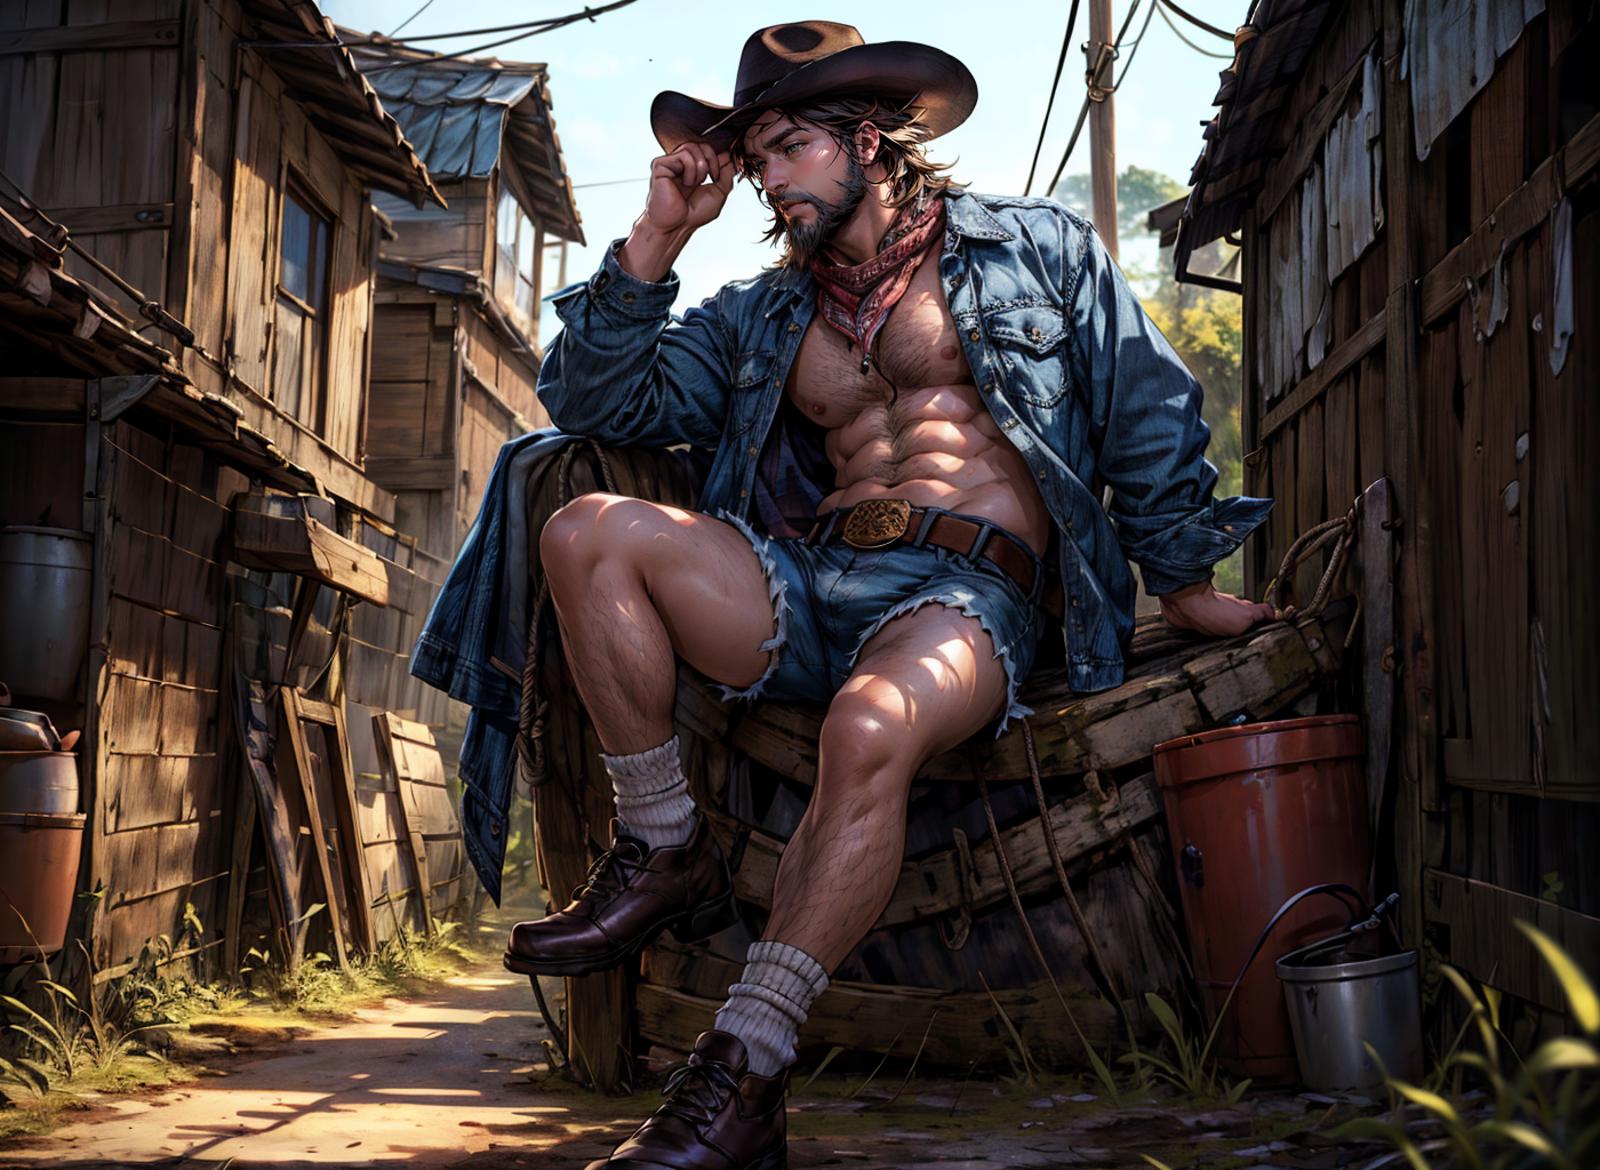 Sexy Cowboy image by lonelykoala